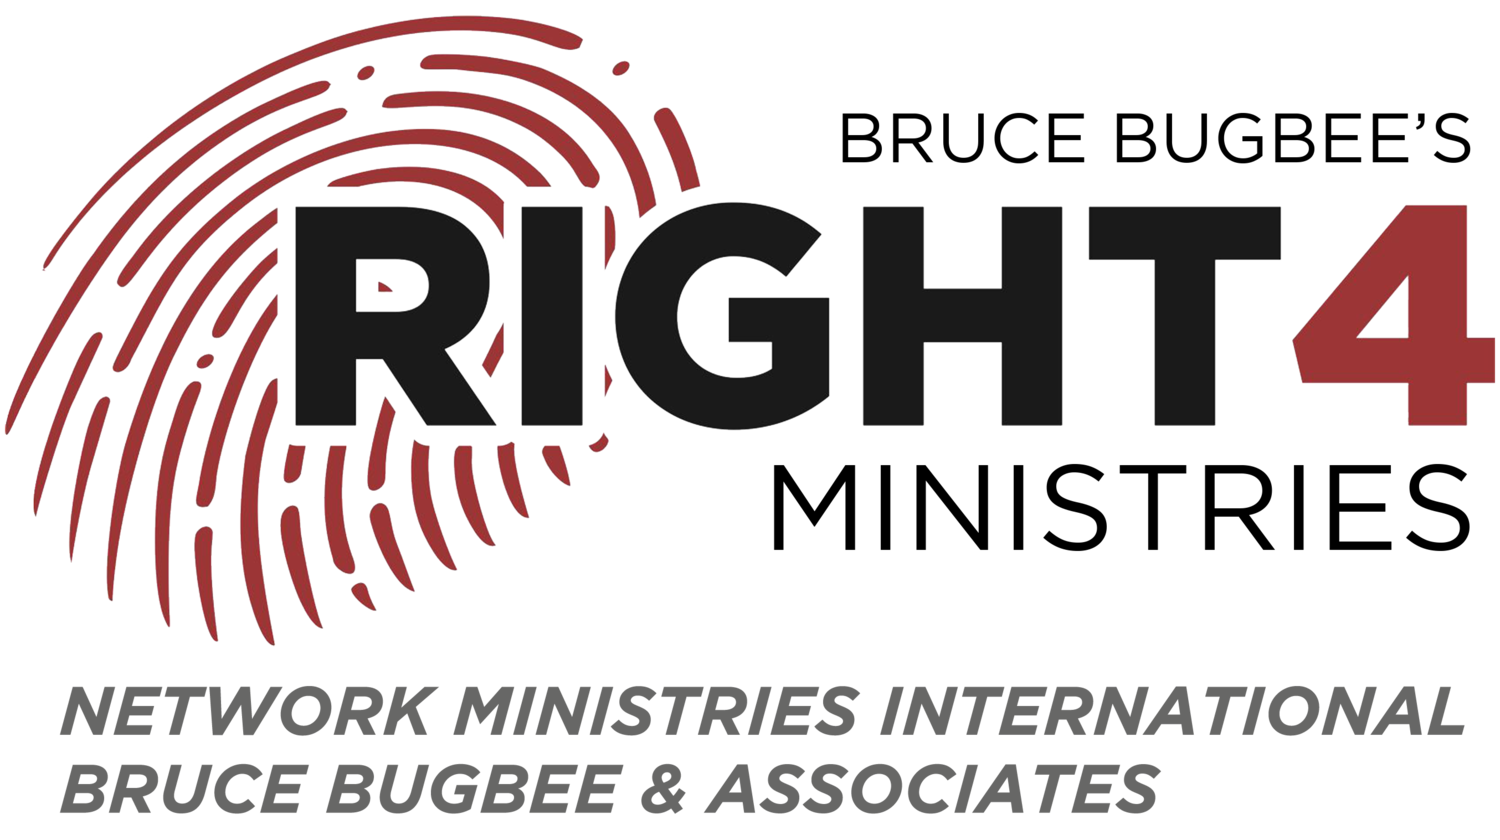 Bruce Bugbee&#39;s RIGHT4 Ministries